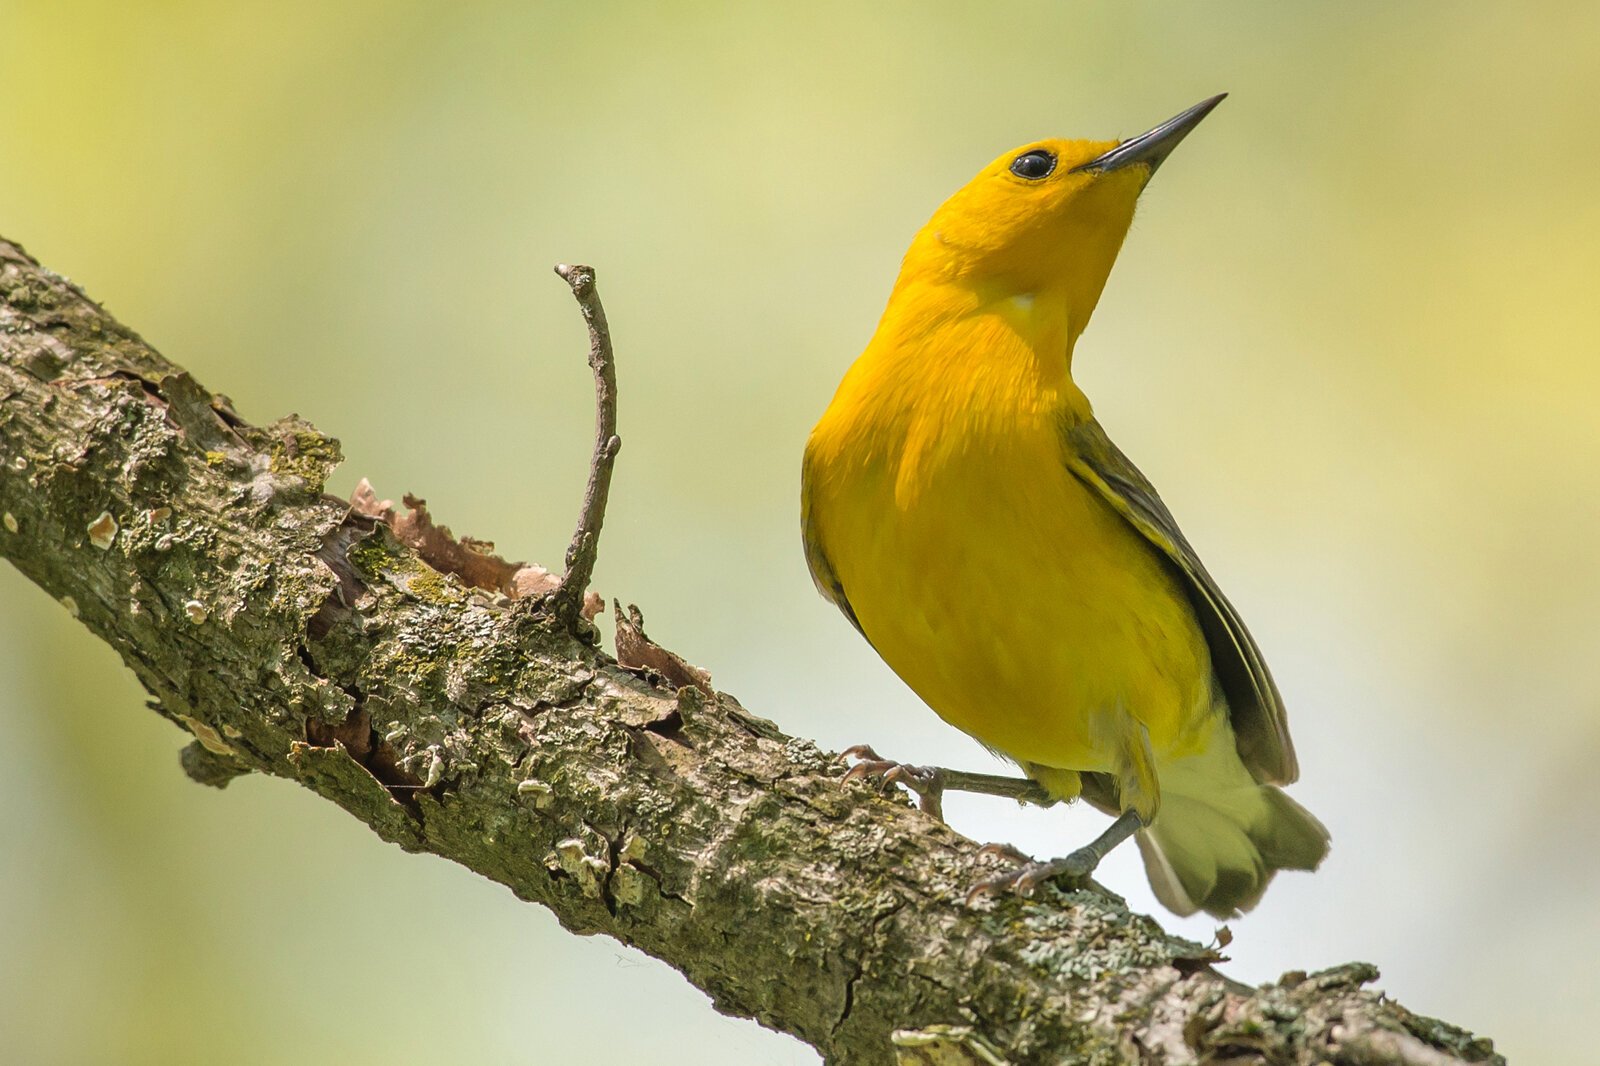 More than 60 bird species from the tiny prothonotary warbler, seen here, to nearby bald eagles nests have been identified at the Armintrout-Milbocker Nature Preserve, the latest piece of land preserved by the Southwest Michigan Land Conservancy.